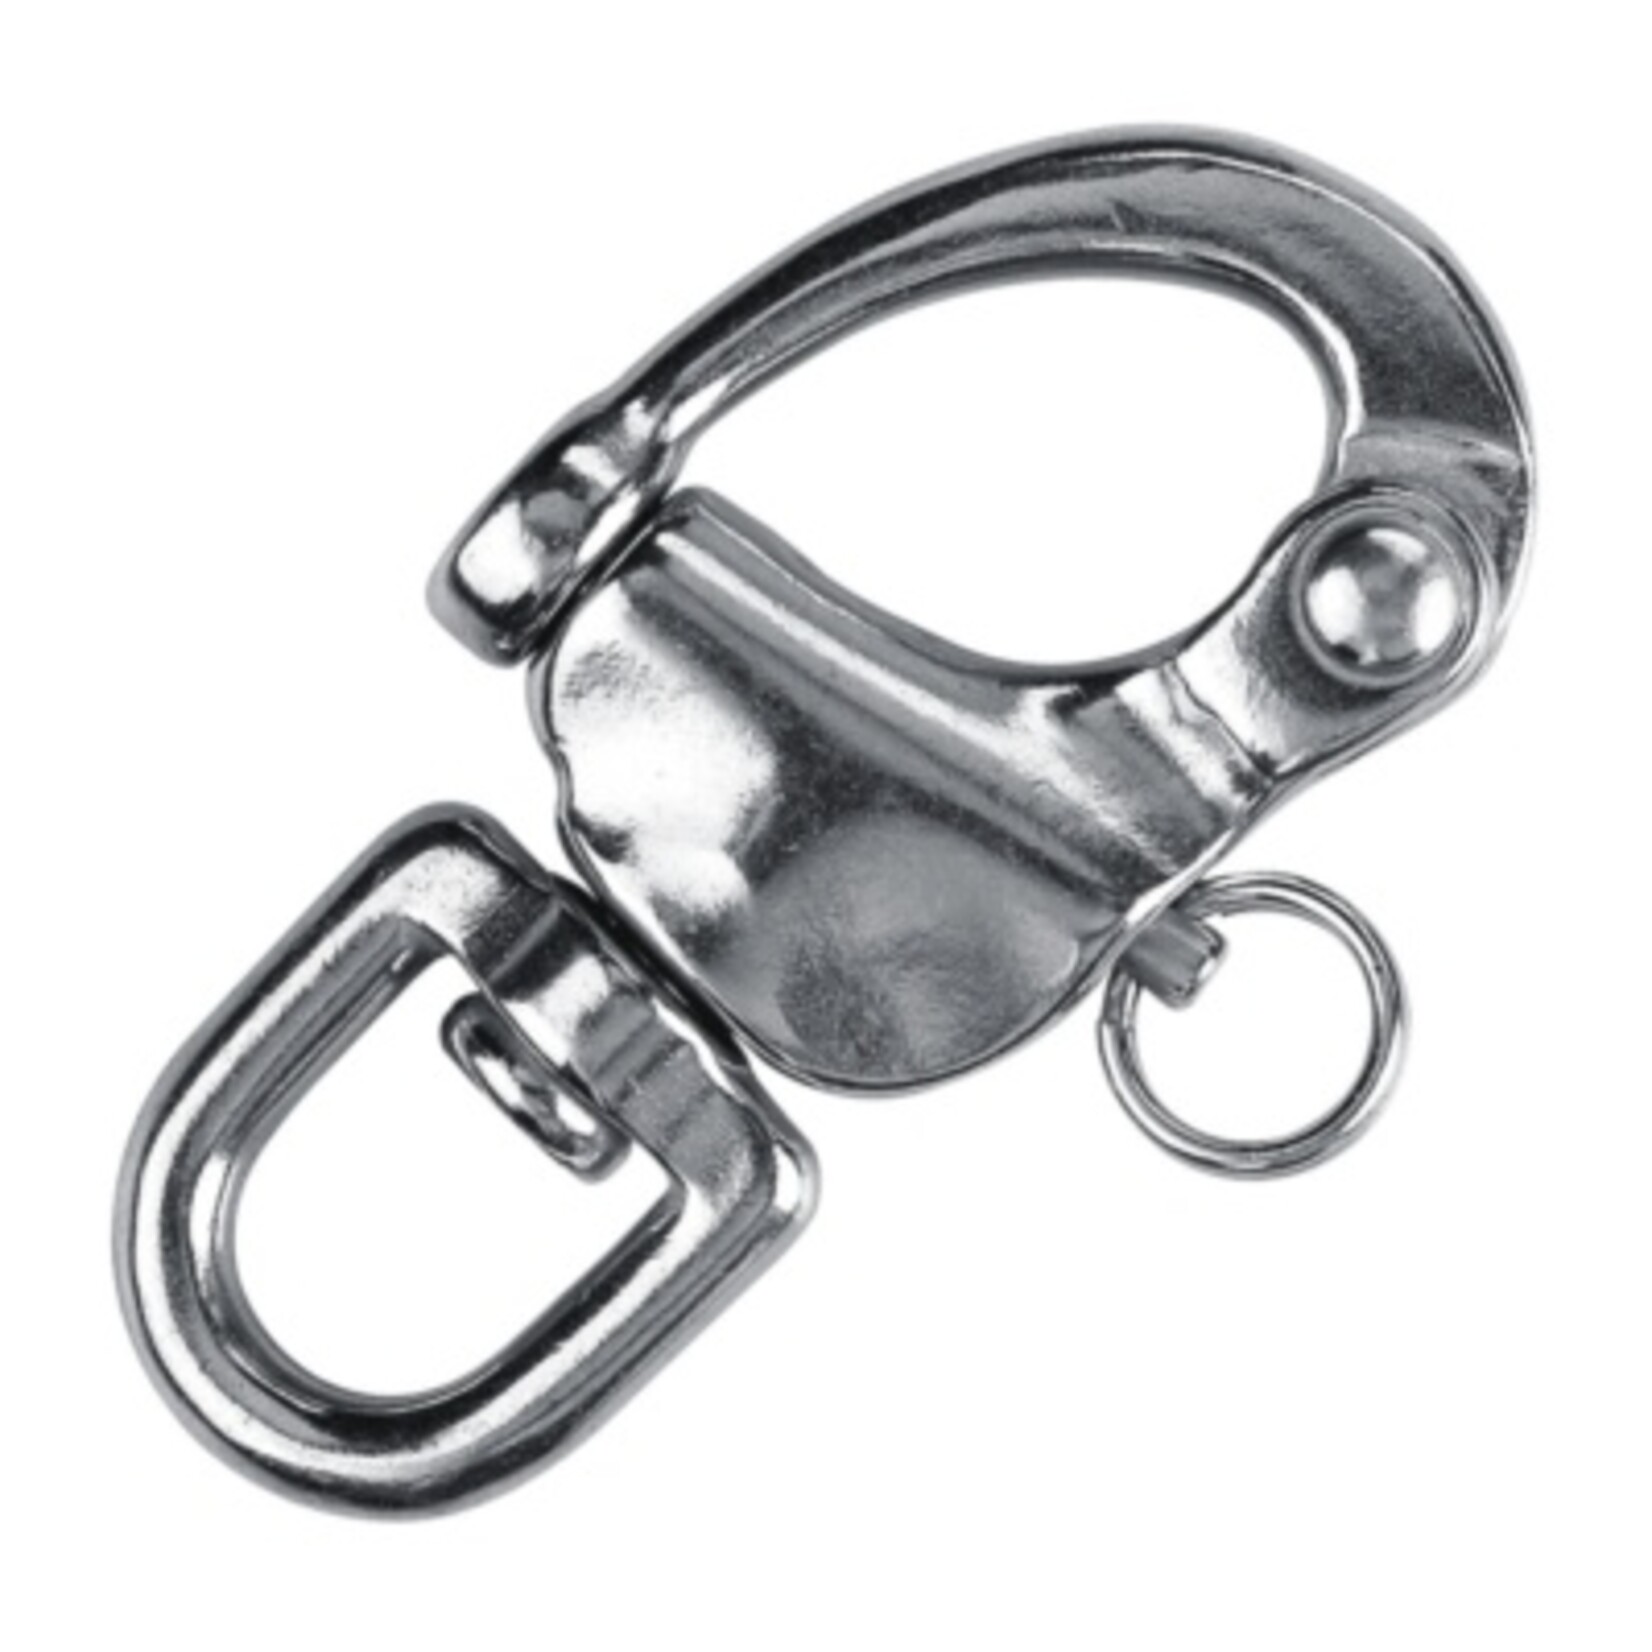 Plastimo Snap shackle s/s with swivel eye 87mm